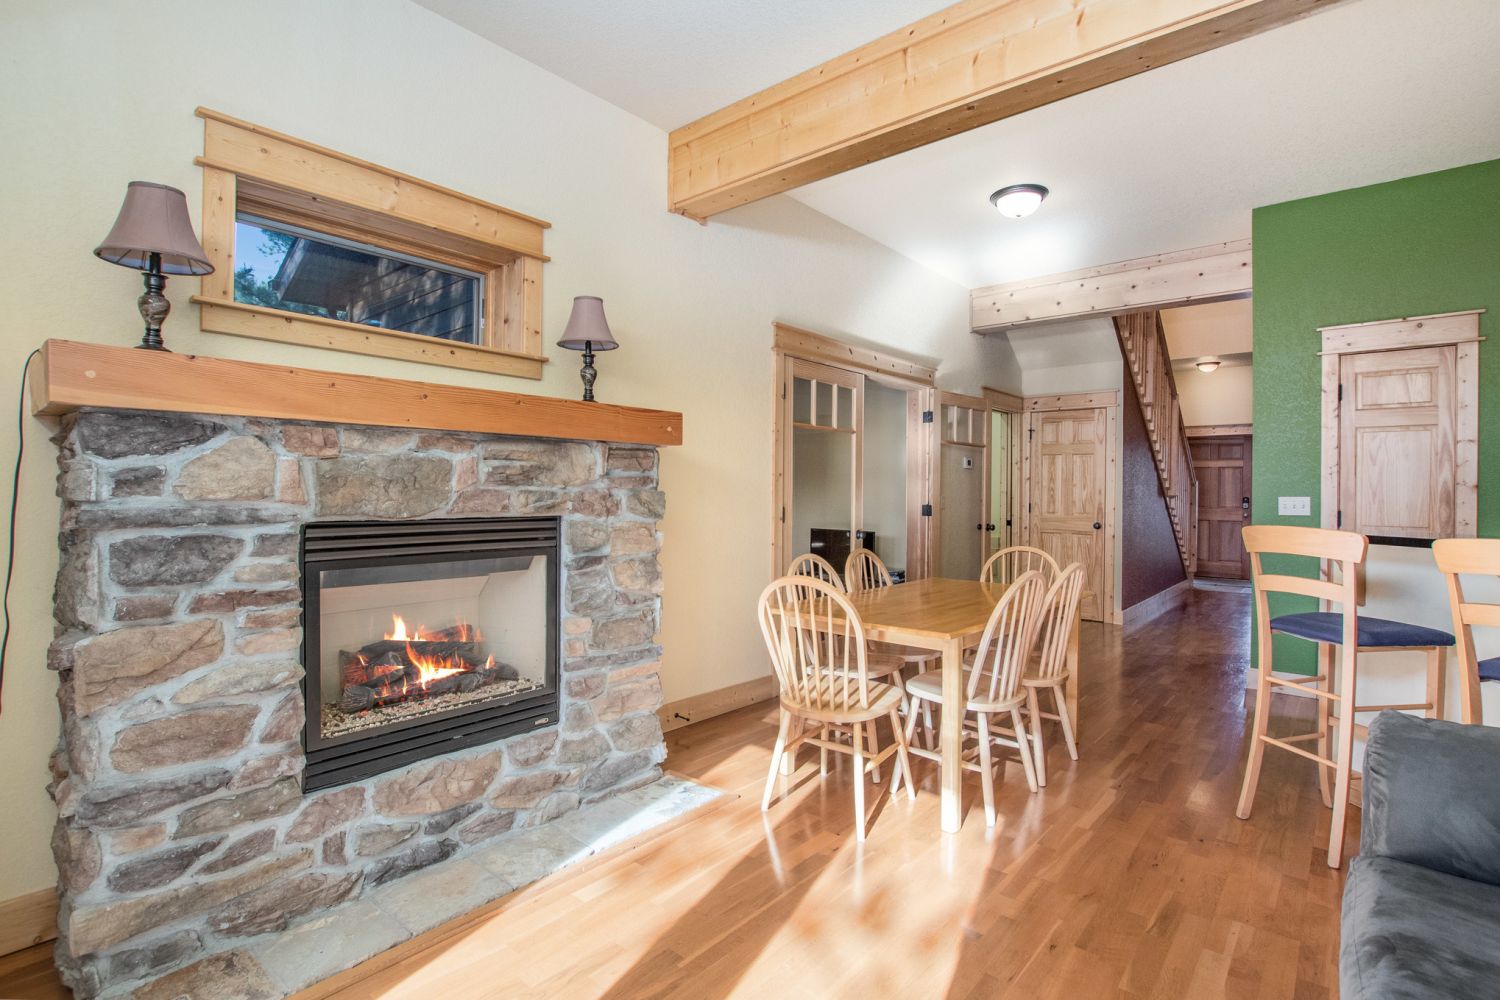 Columbine Meadow - Stone gas fireplace warms the open concept living area.